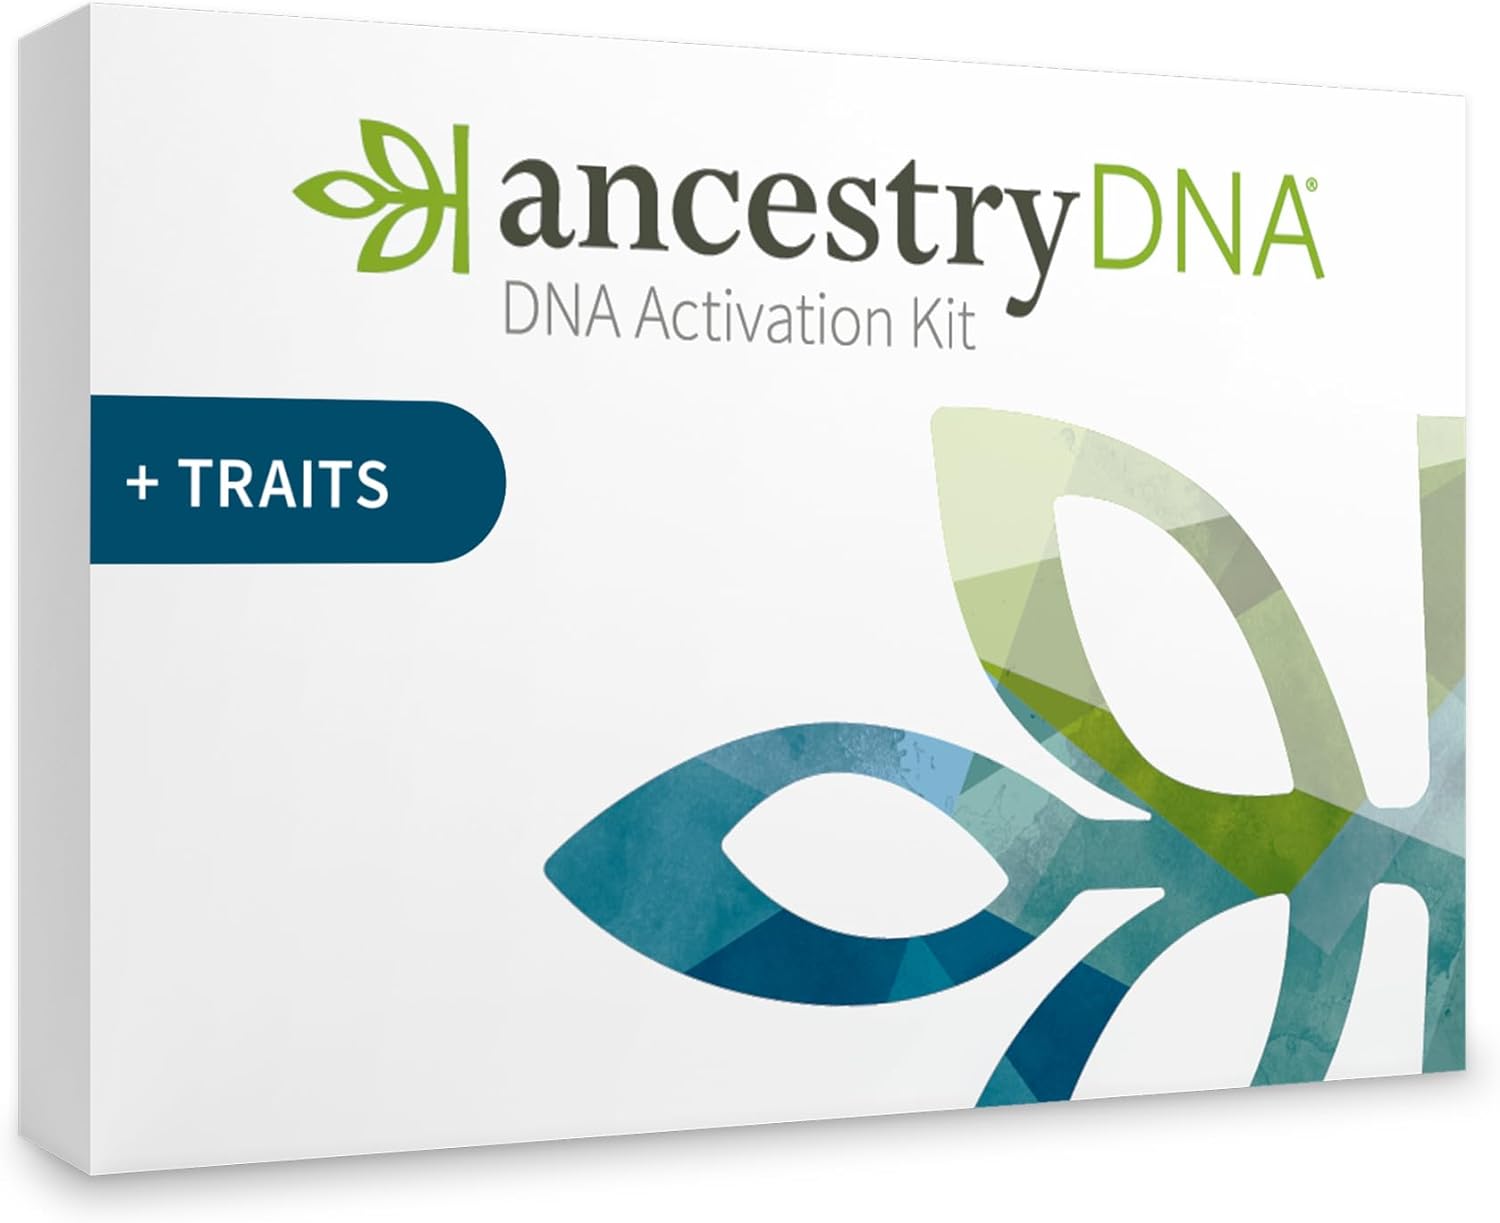 National Free Shipping Day: AncestryDNA